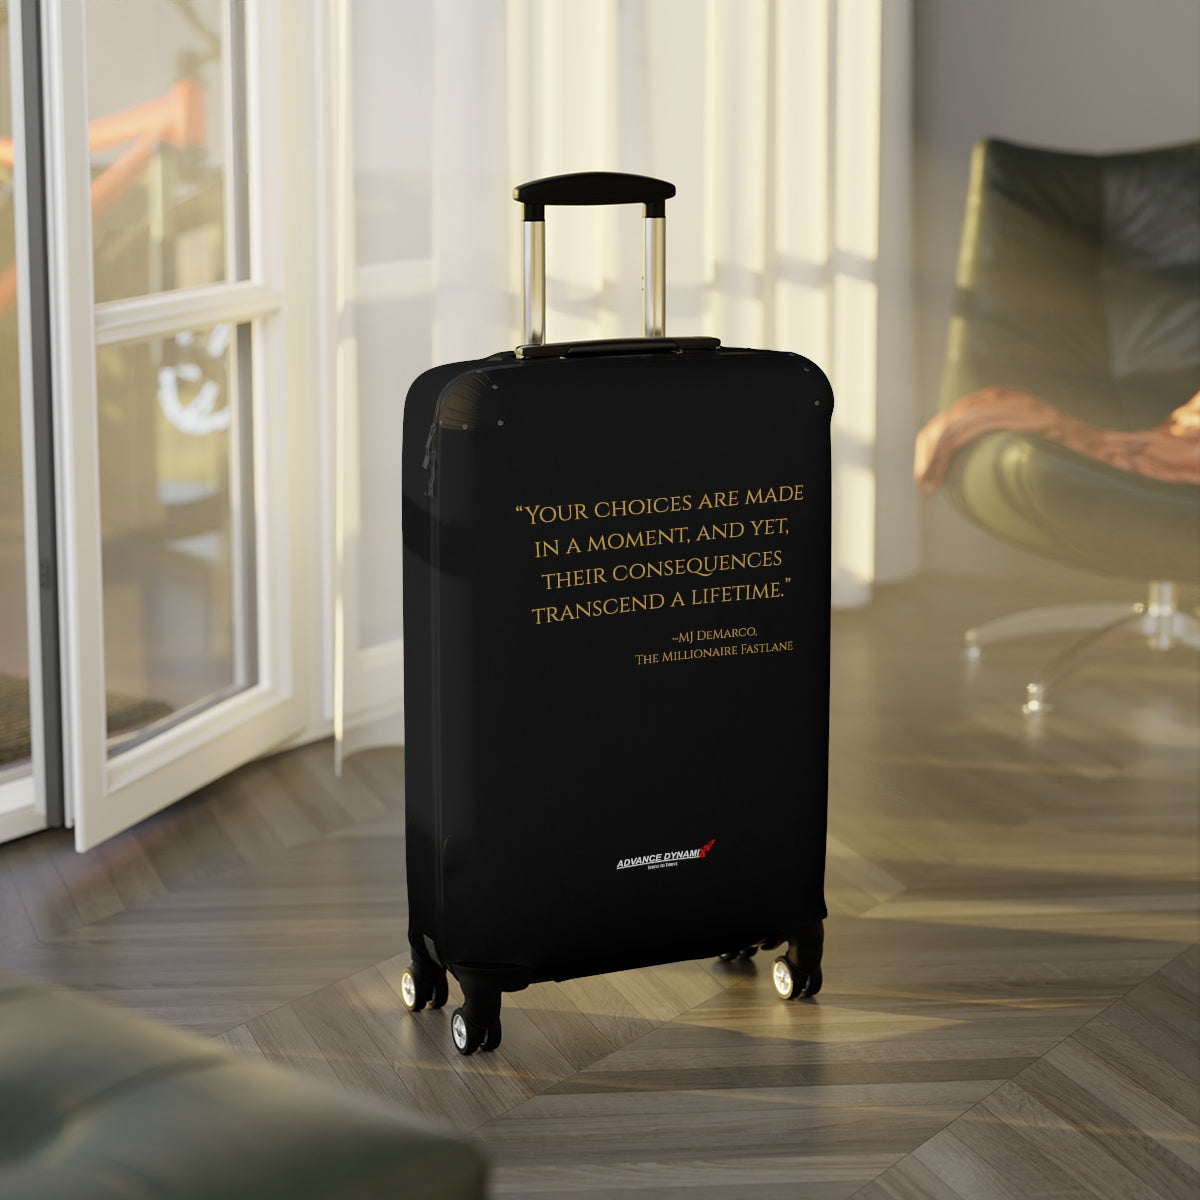 "Your choices are made in a moment, and yet, their consequences transcend a lifetime." ~MJ DeMarco, The Millionaire Fastlane - Luggage Covers Infused with Advance Dynamix Add-A-Tude - Tell the world!